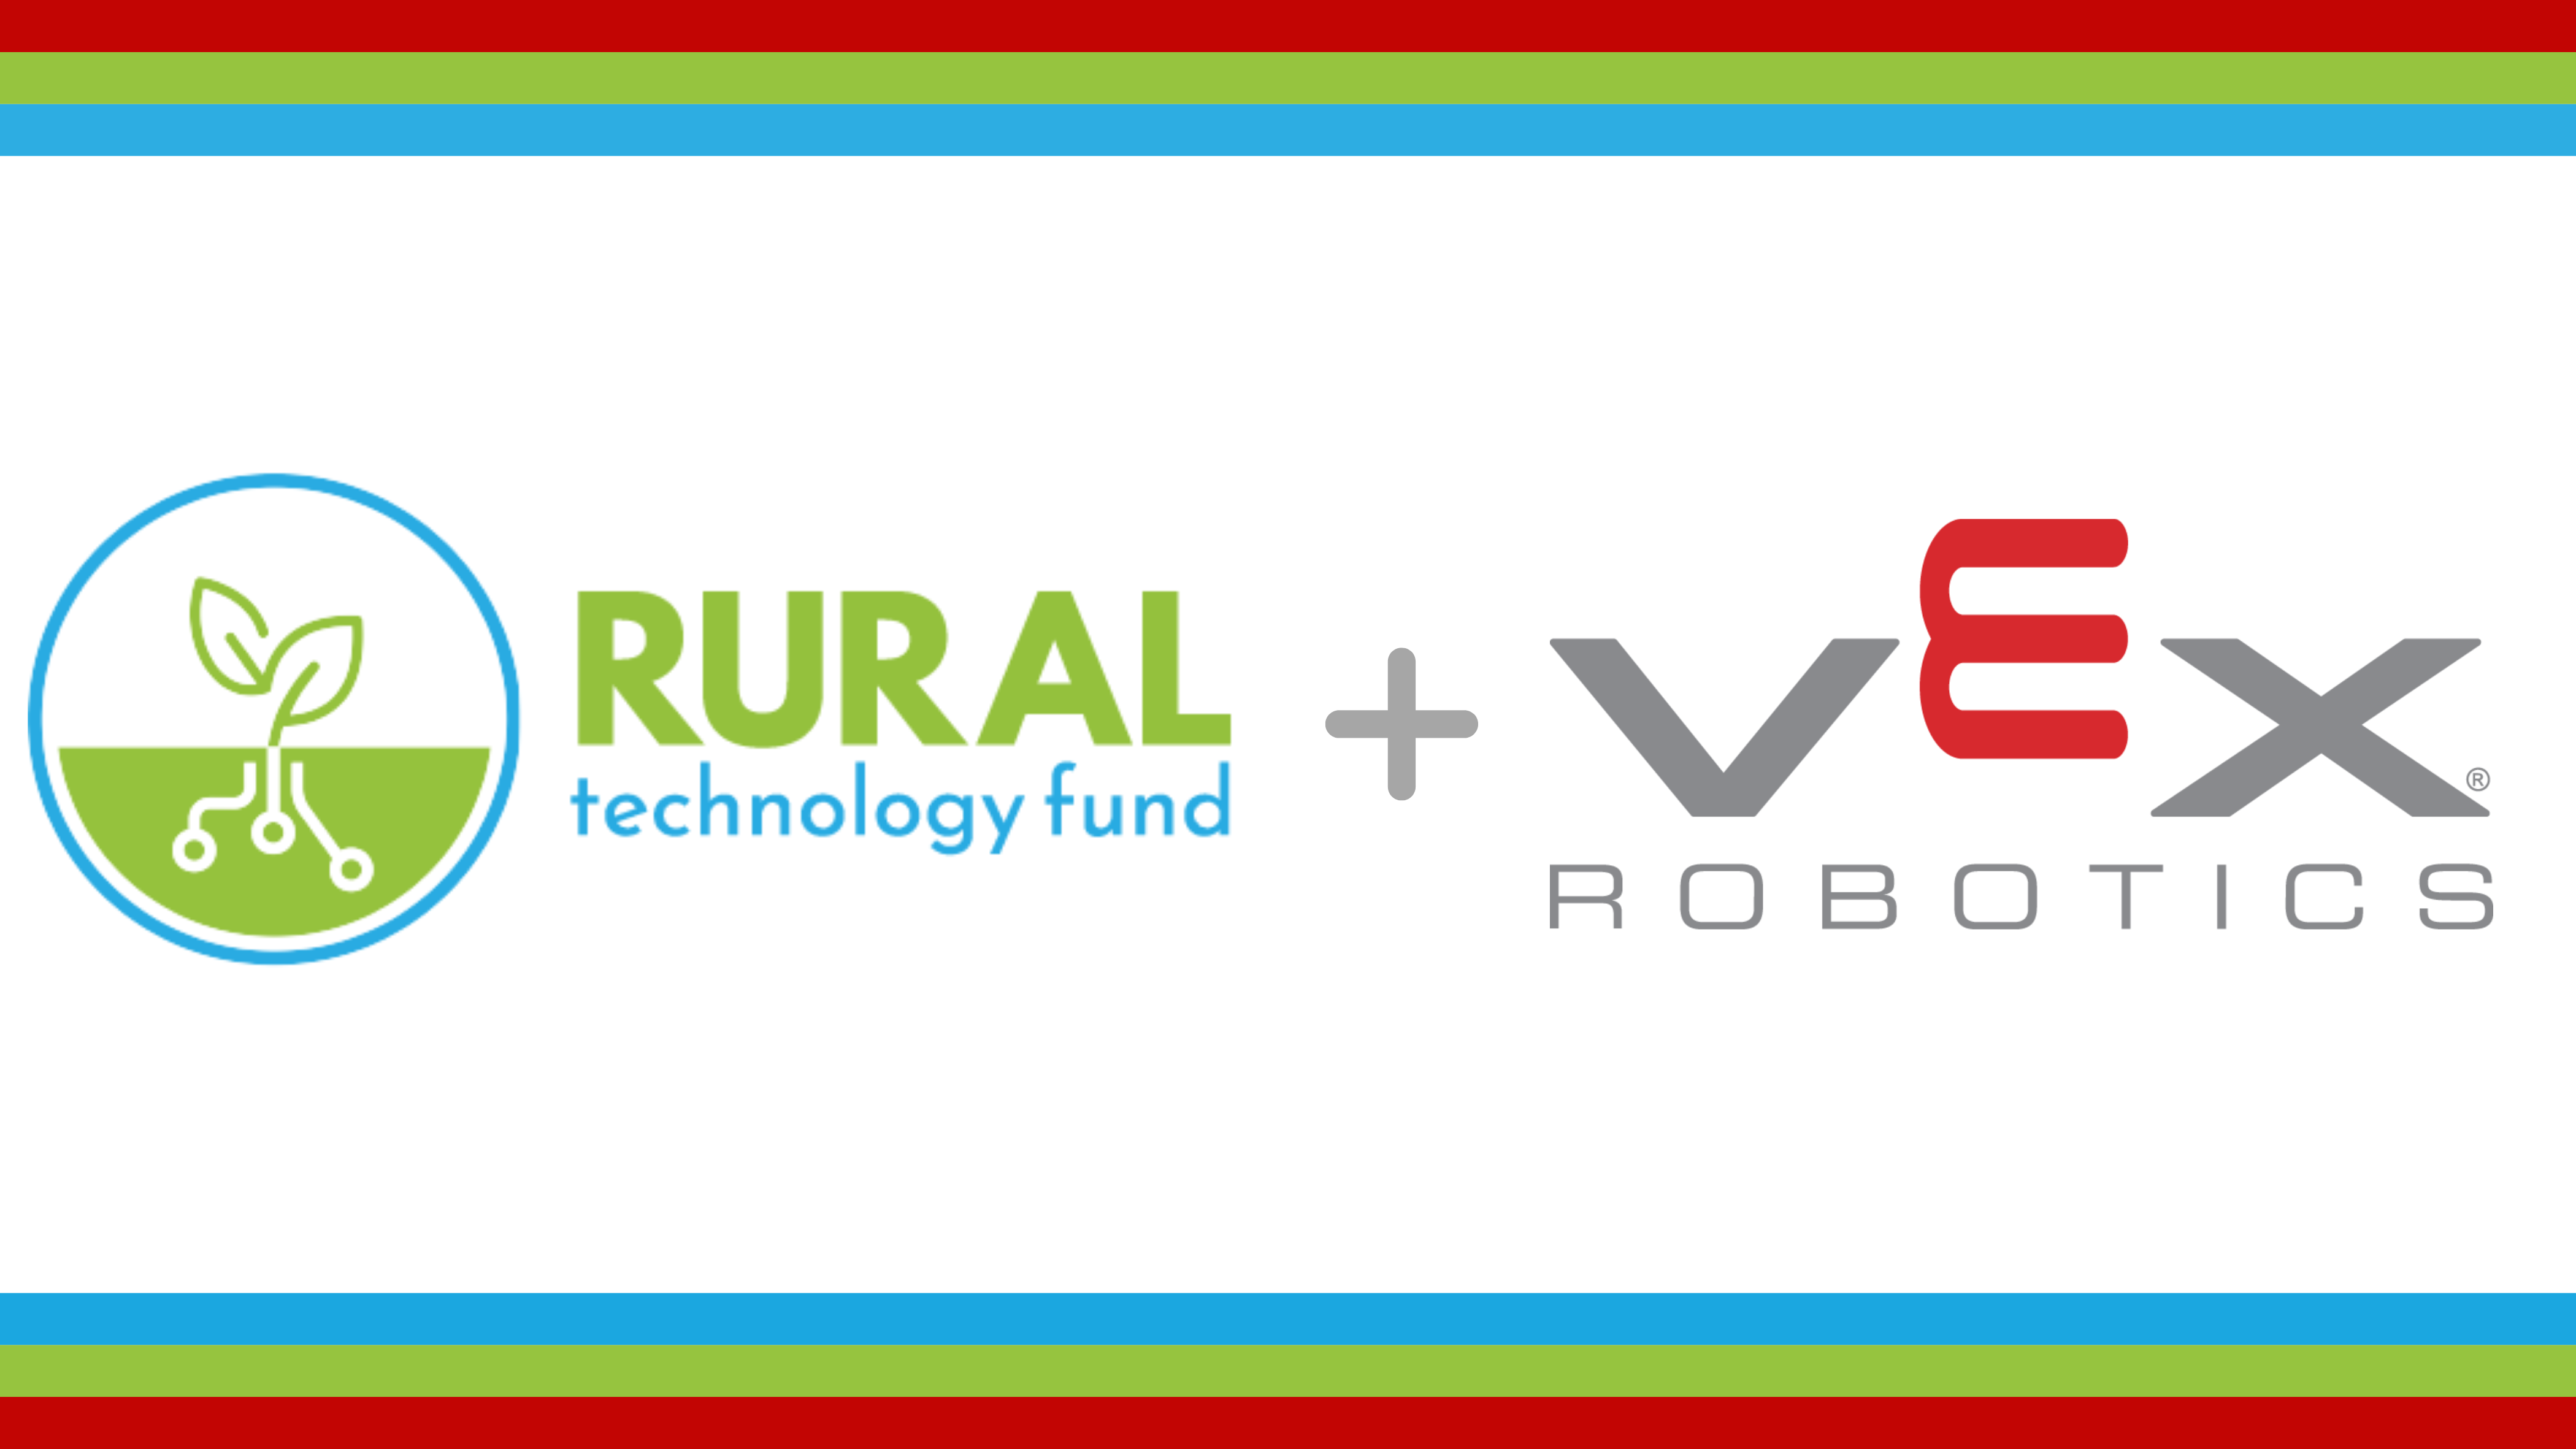 The logos for the Rural Technology Fund and VEX Robotics are displayed together.